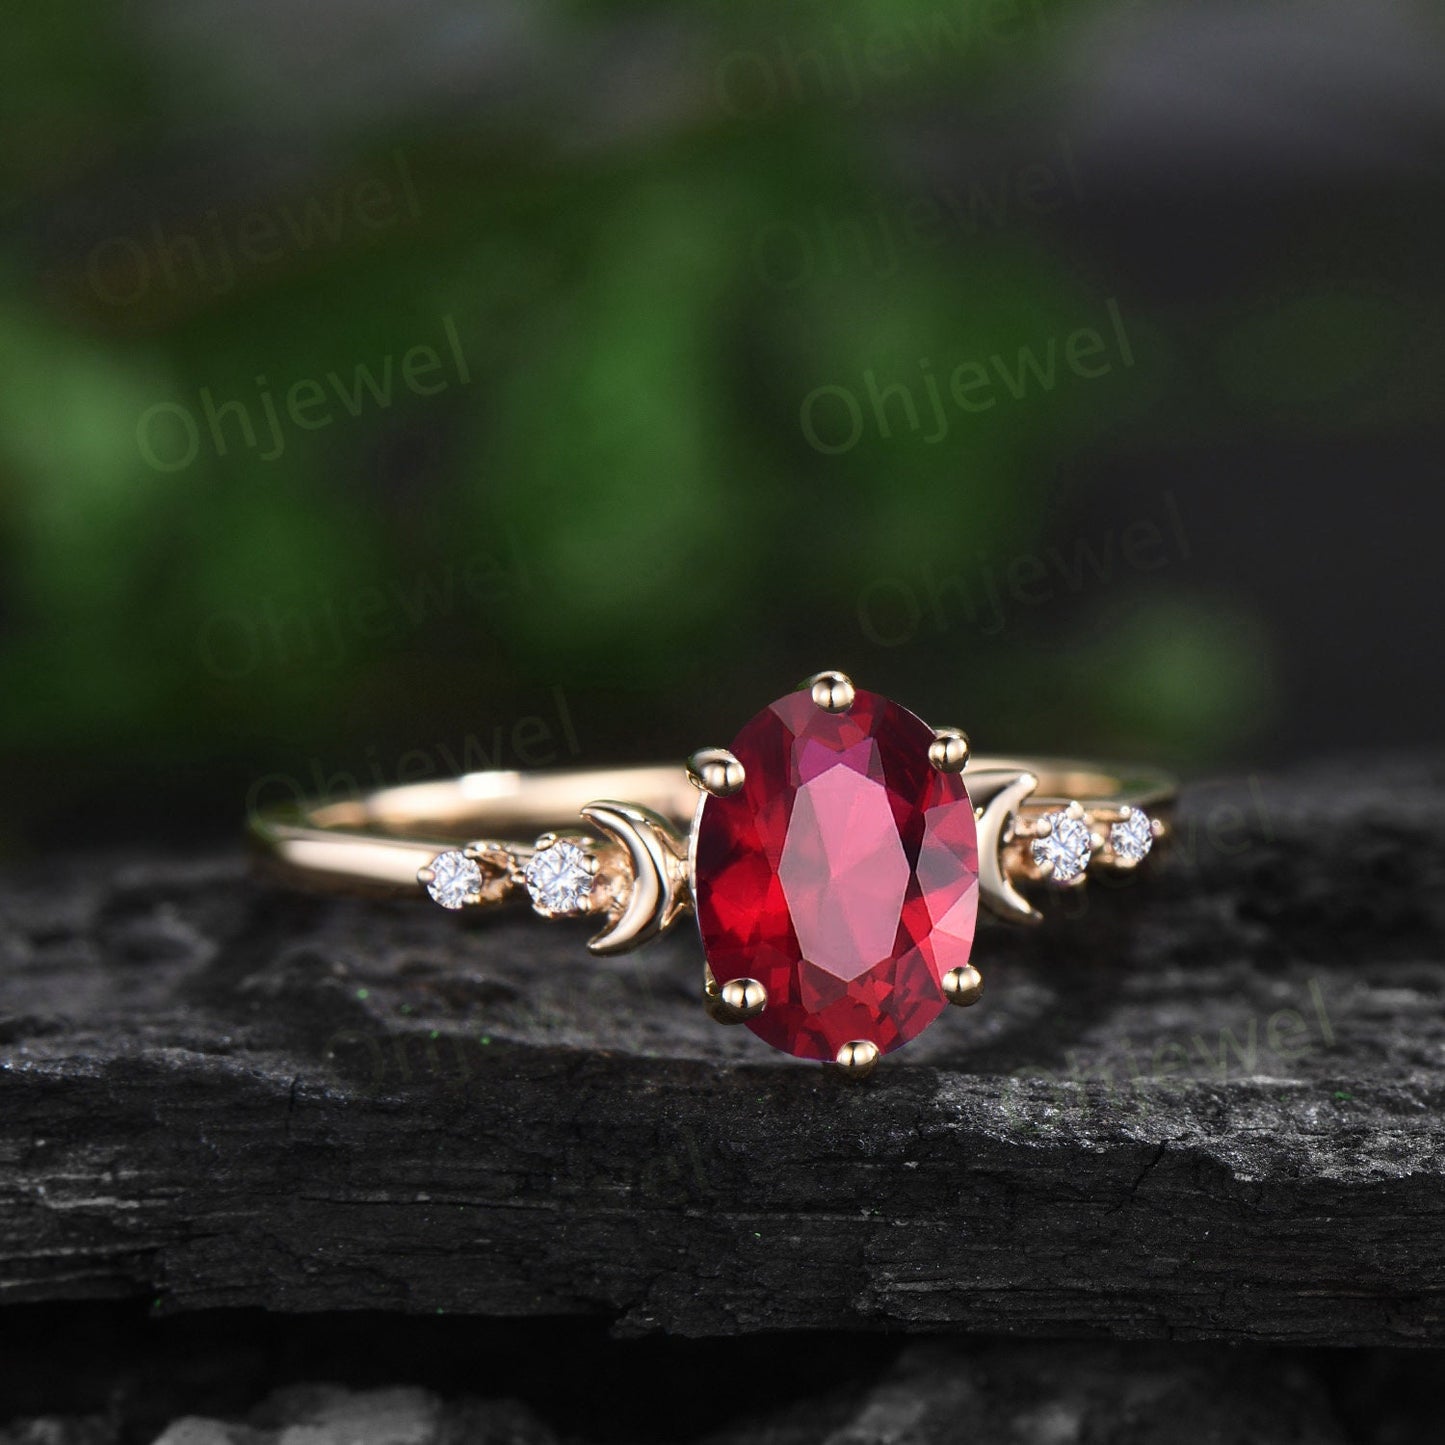 Vintage oval cut ruby engagement ring solid 14k yellow gold art deco five stone moon diamond ring women unique wedding anniversary ring gift